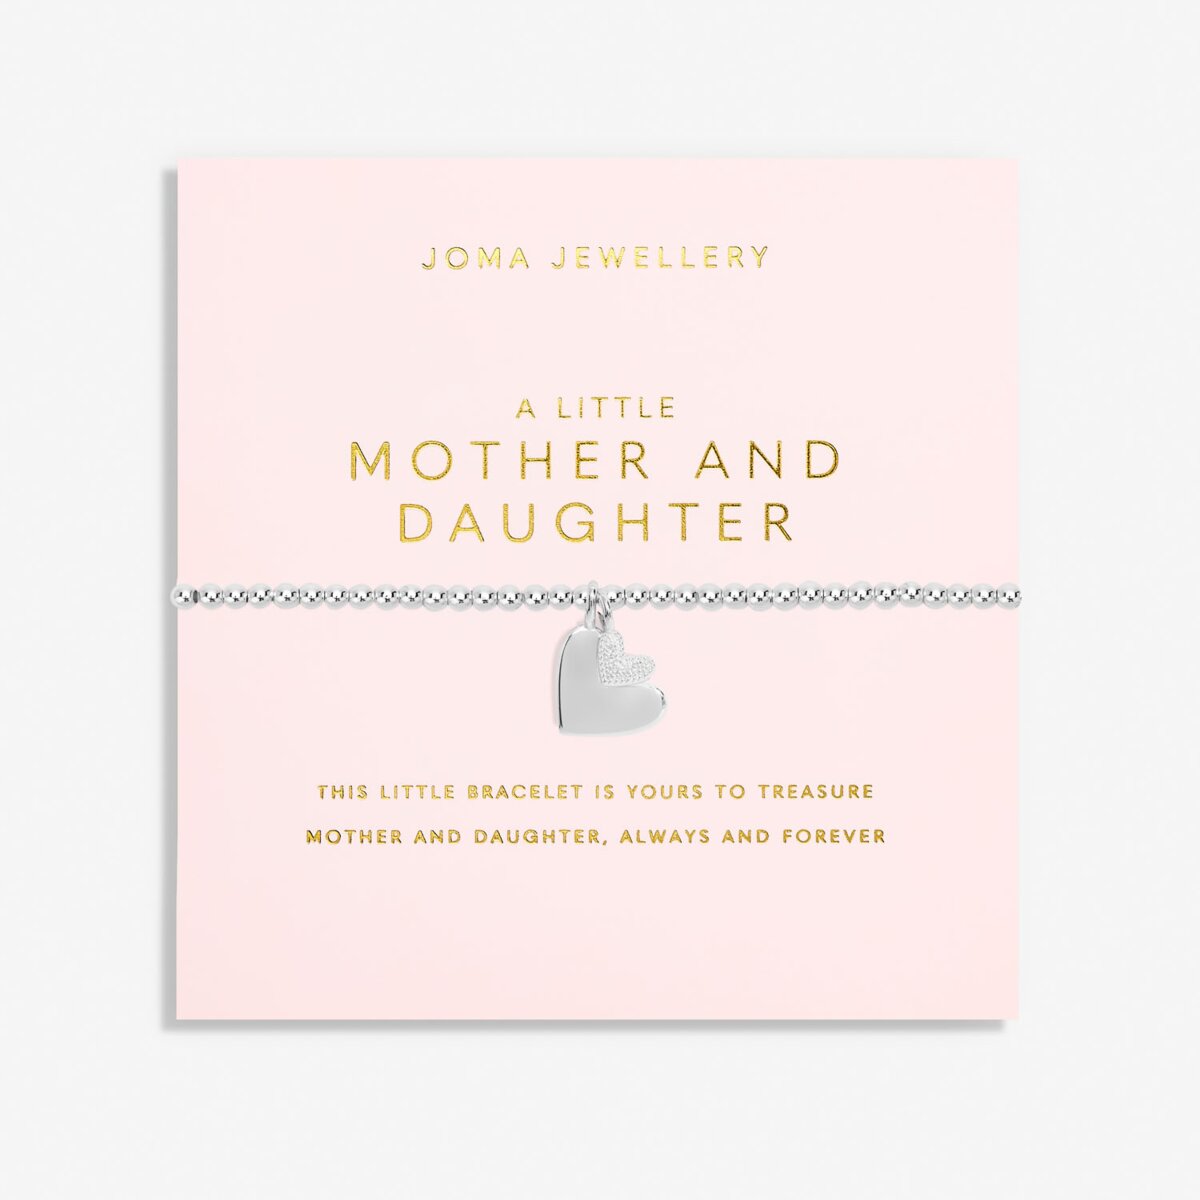 JOMA JEWELLERY | MOTHER'S DAY A LITTLE | MOTHER AND DAUGHTER BRACELET